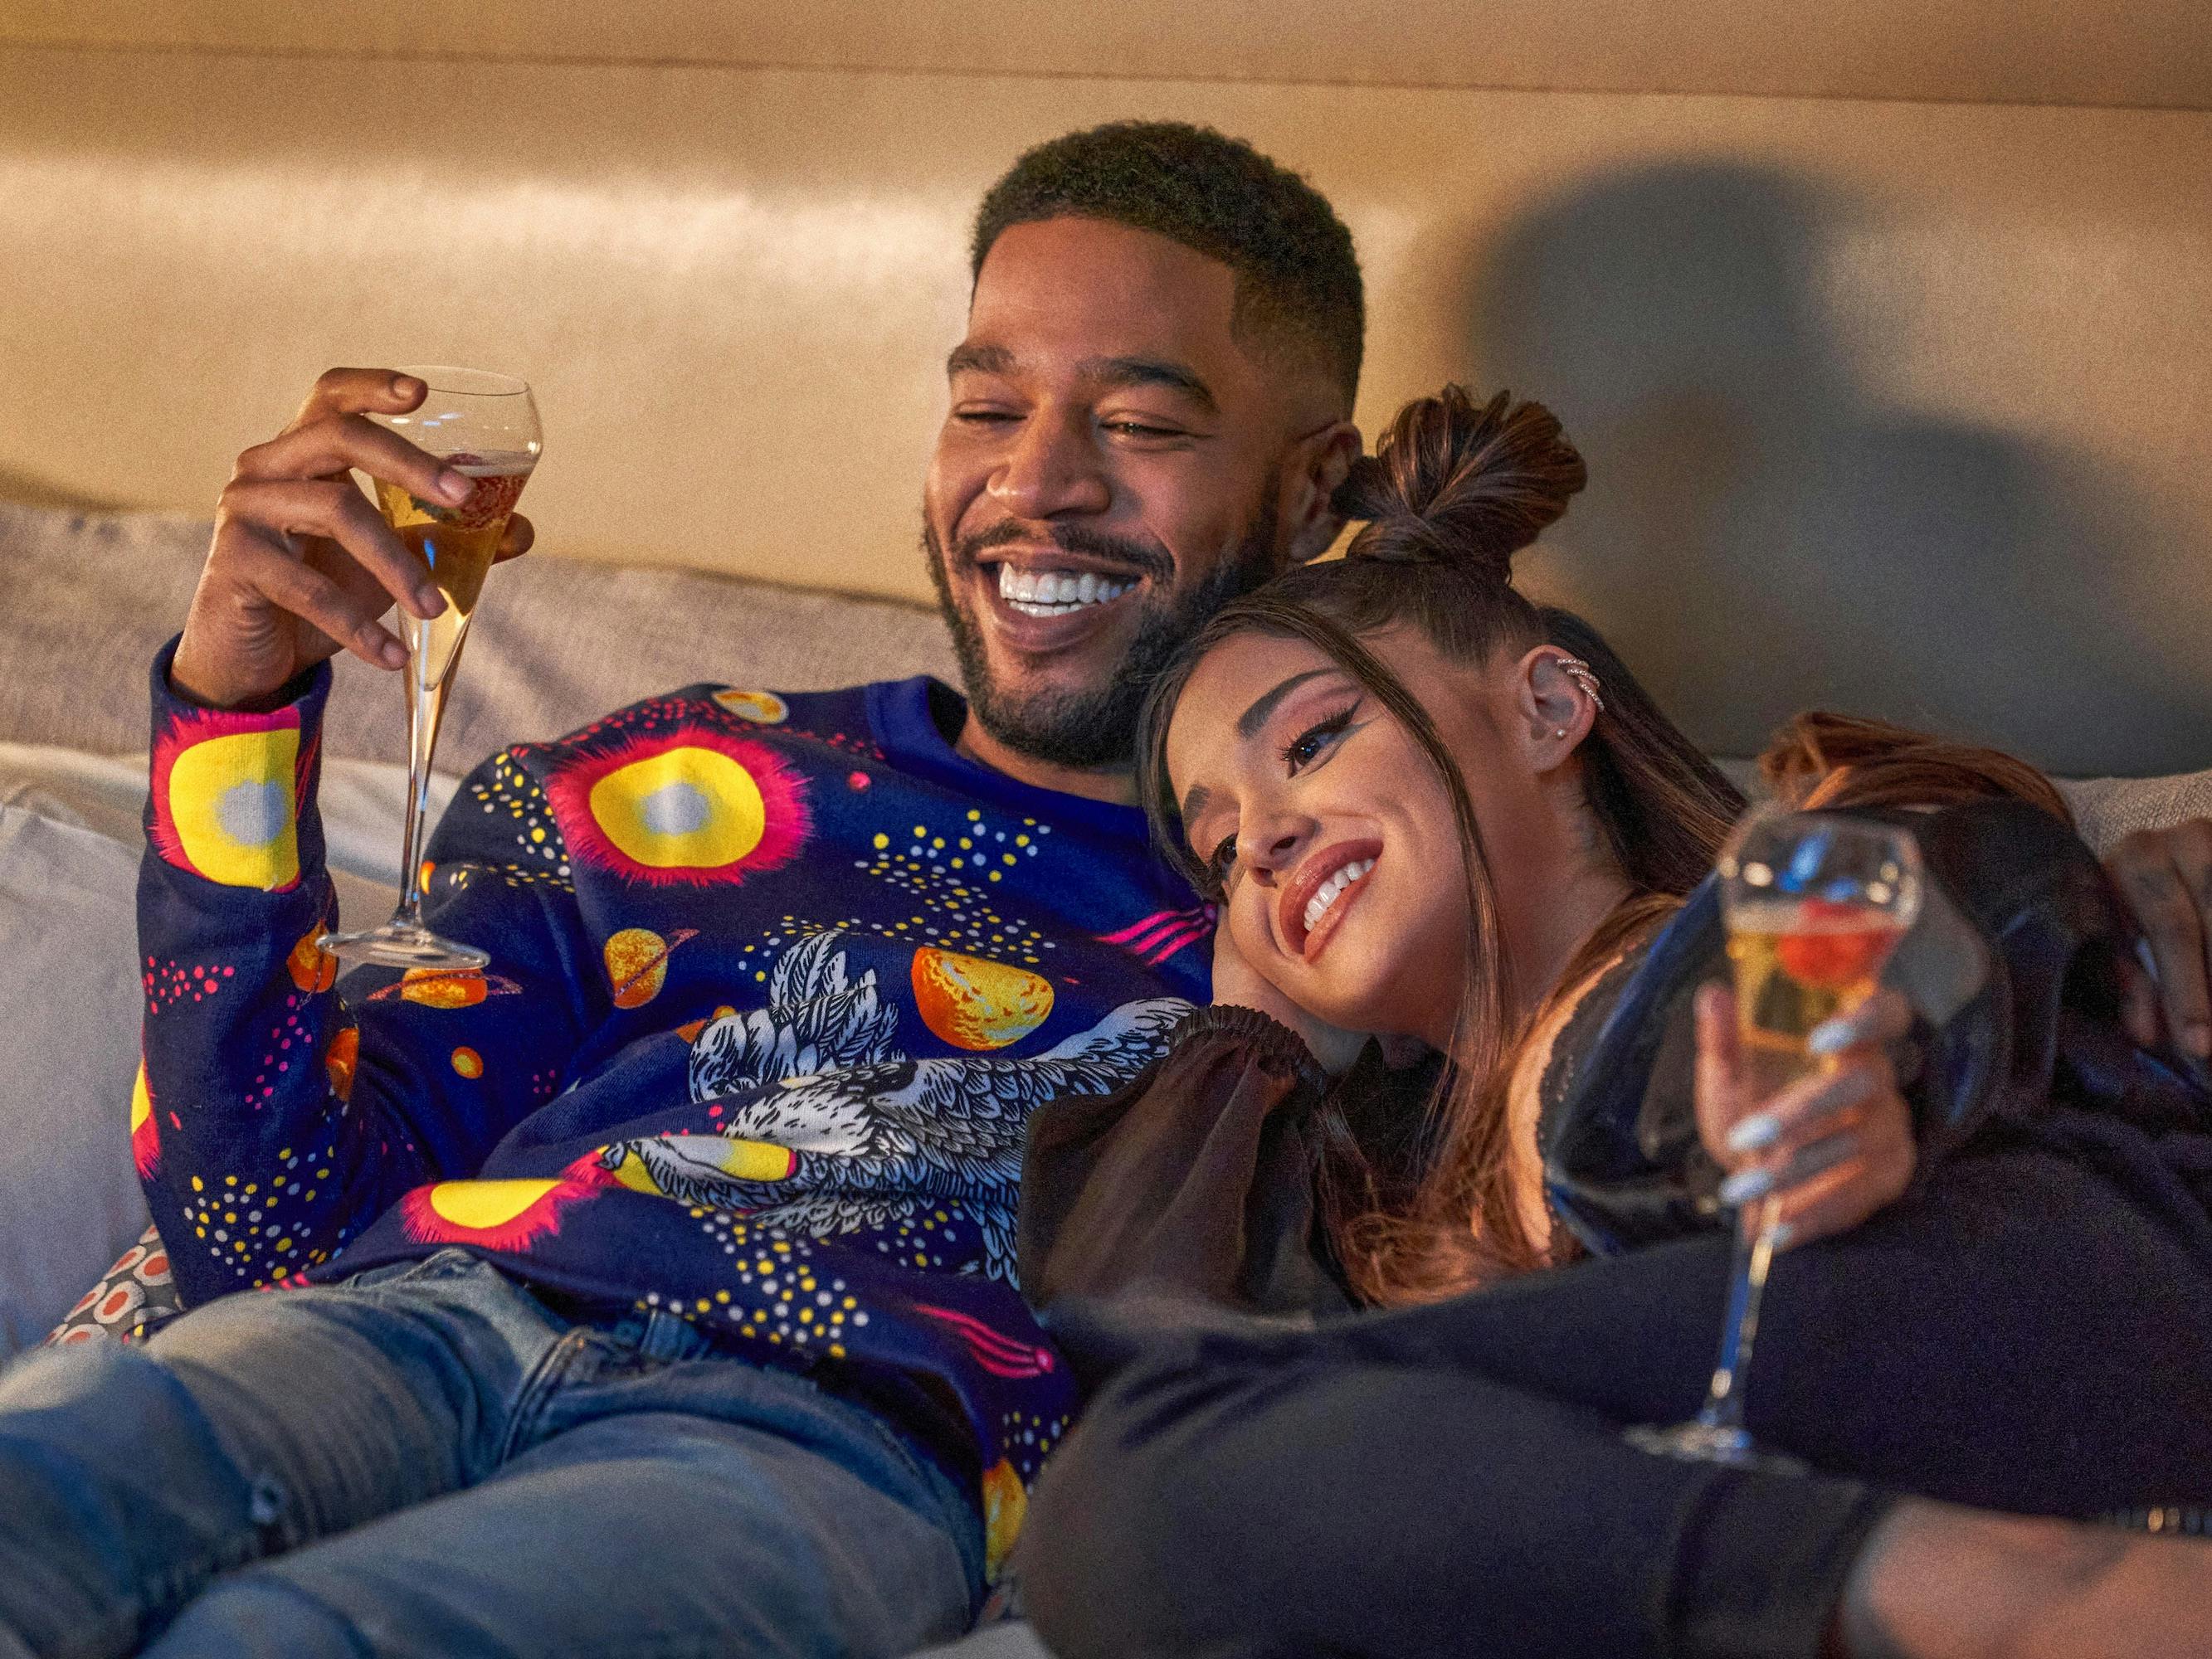 Scott Mescudi and Ariana Grande sit on a couch together drinking fruity champagne. Mescudi wears a patterned sweater and jeans. Grande wears a grey sweatsuit.